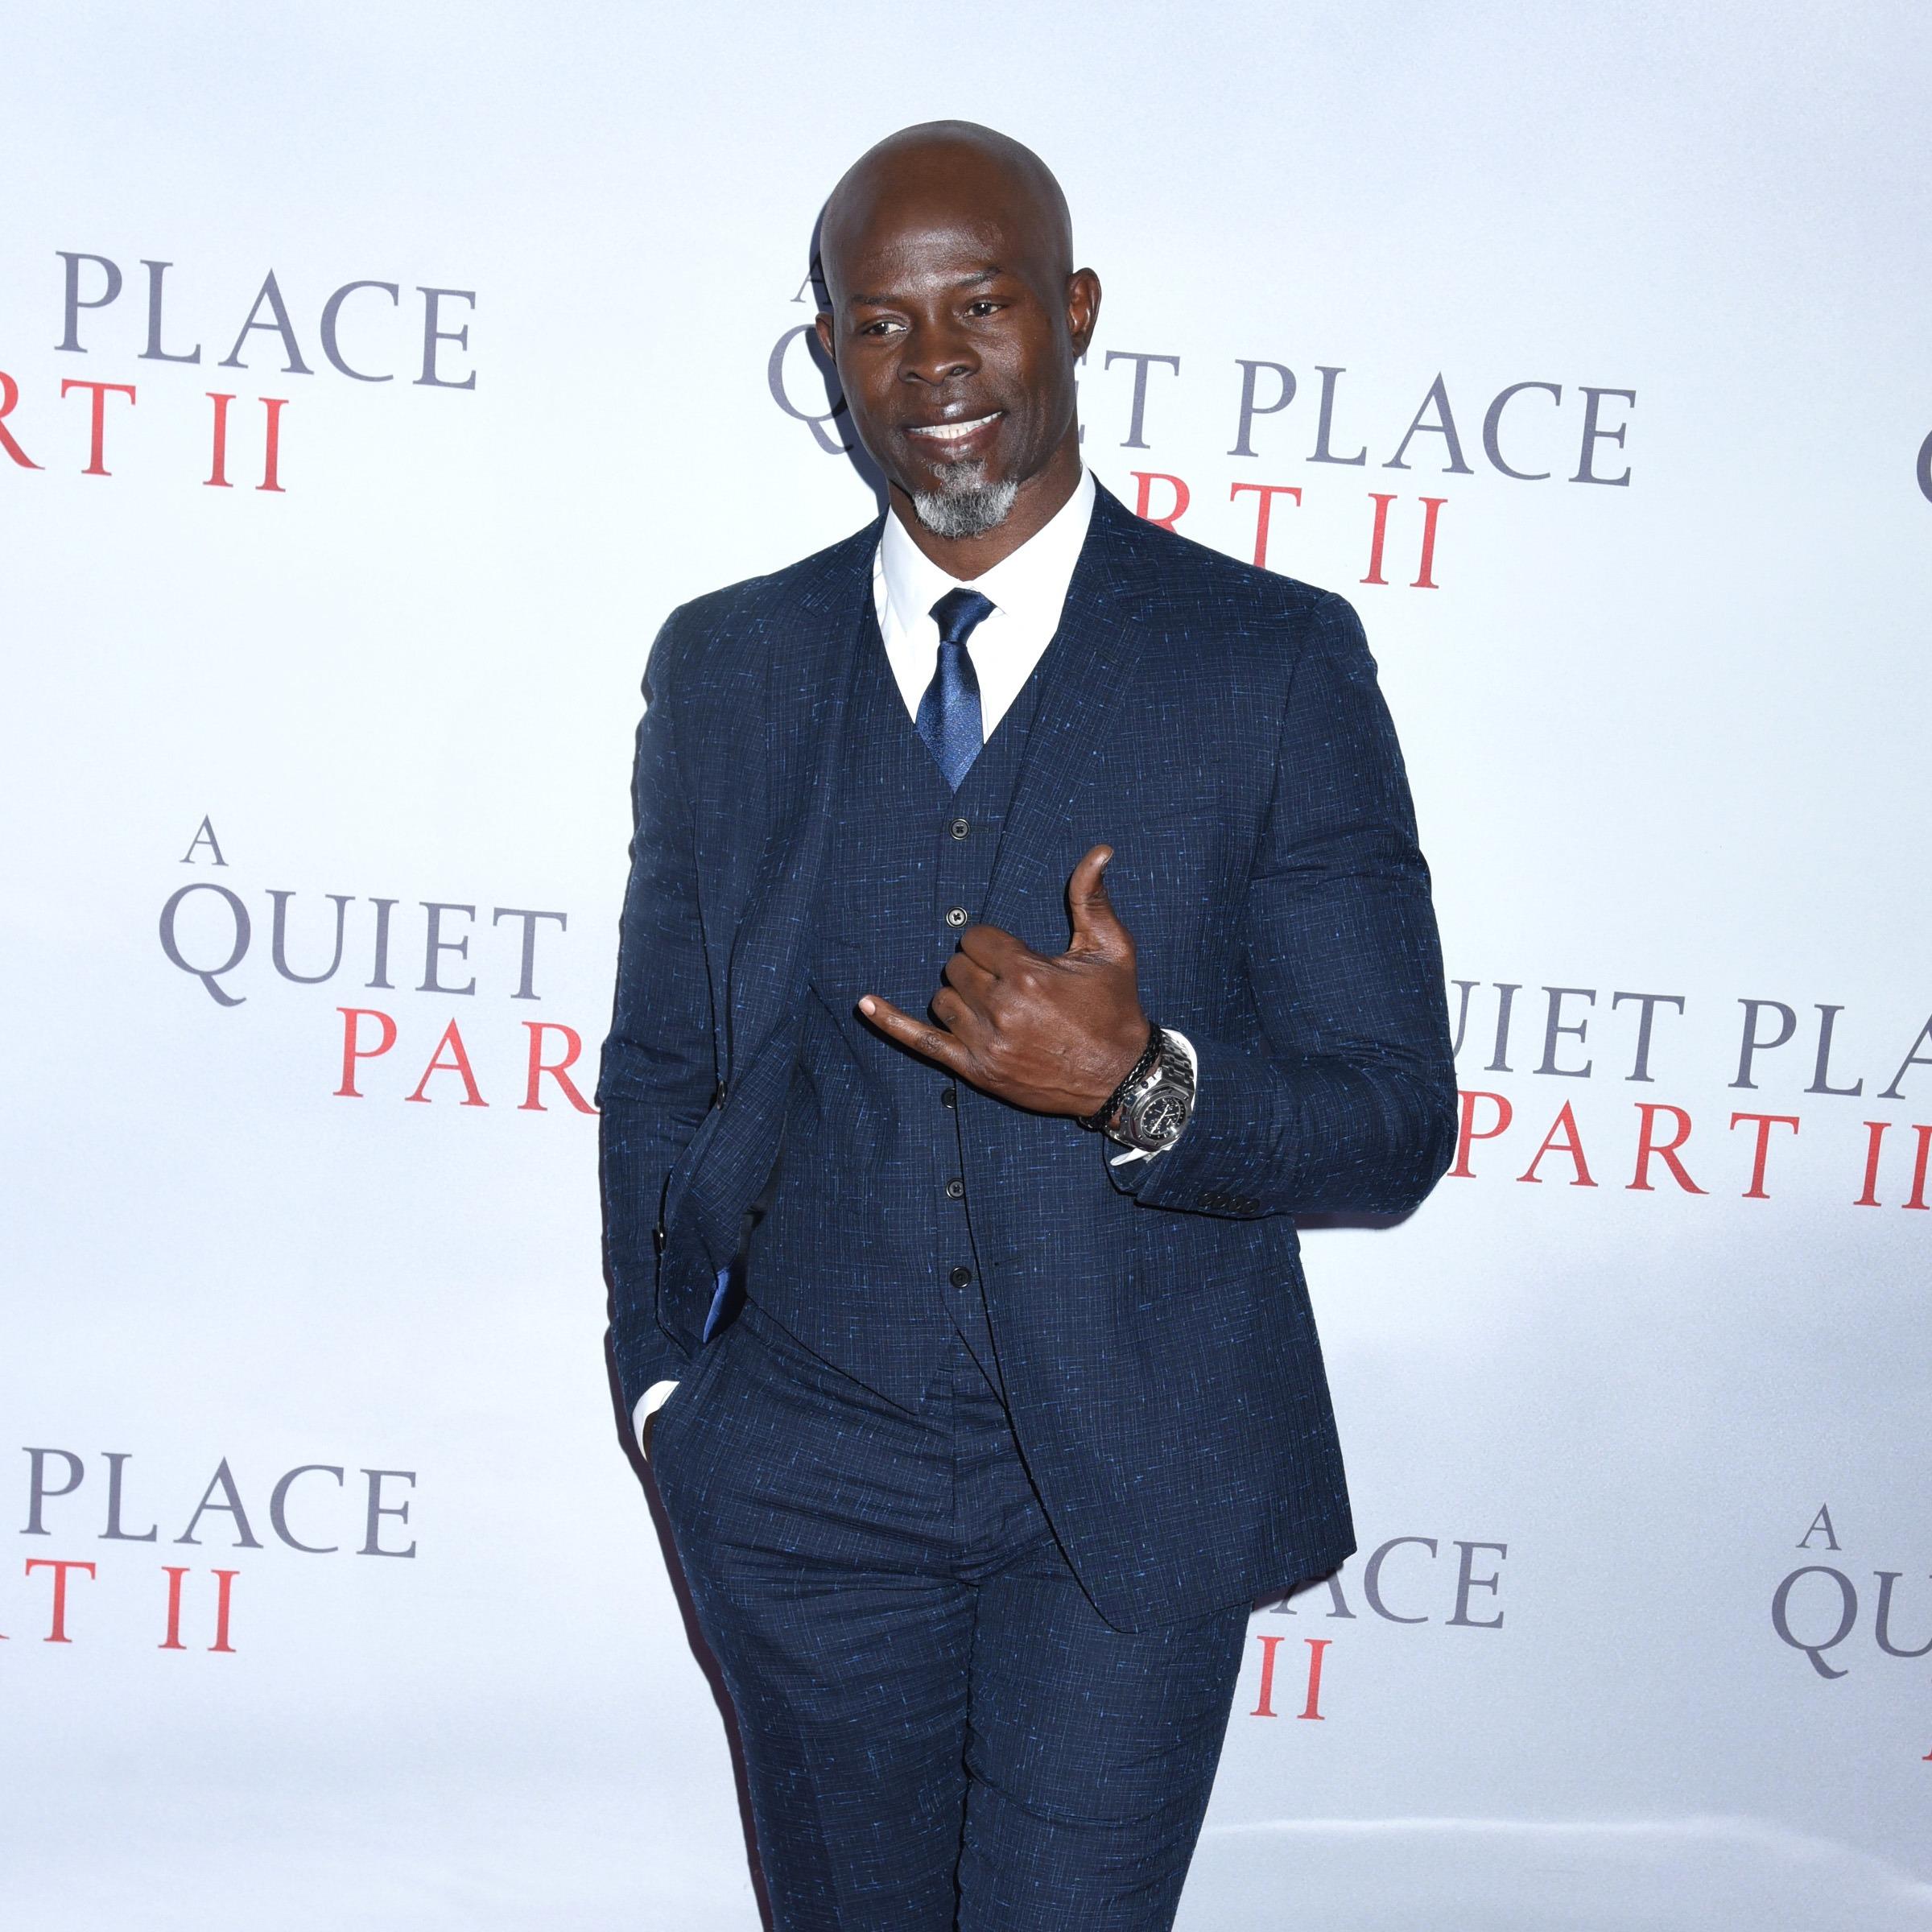 Djimon Hounsou Says He Has Never Been Paid Well Enough For Any Film, Feels 'Tremendously Cheated' By Hollywood